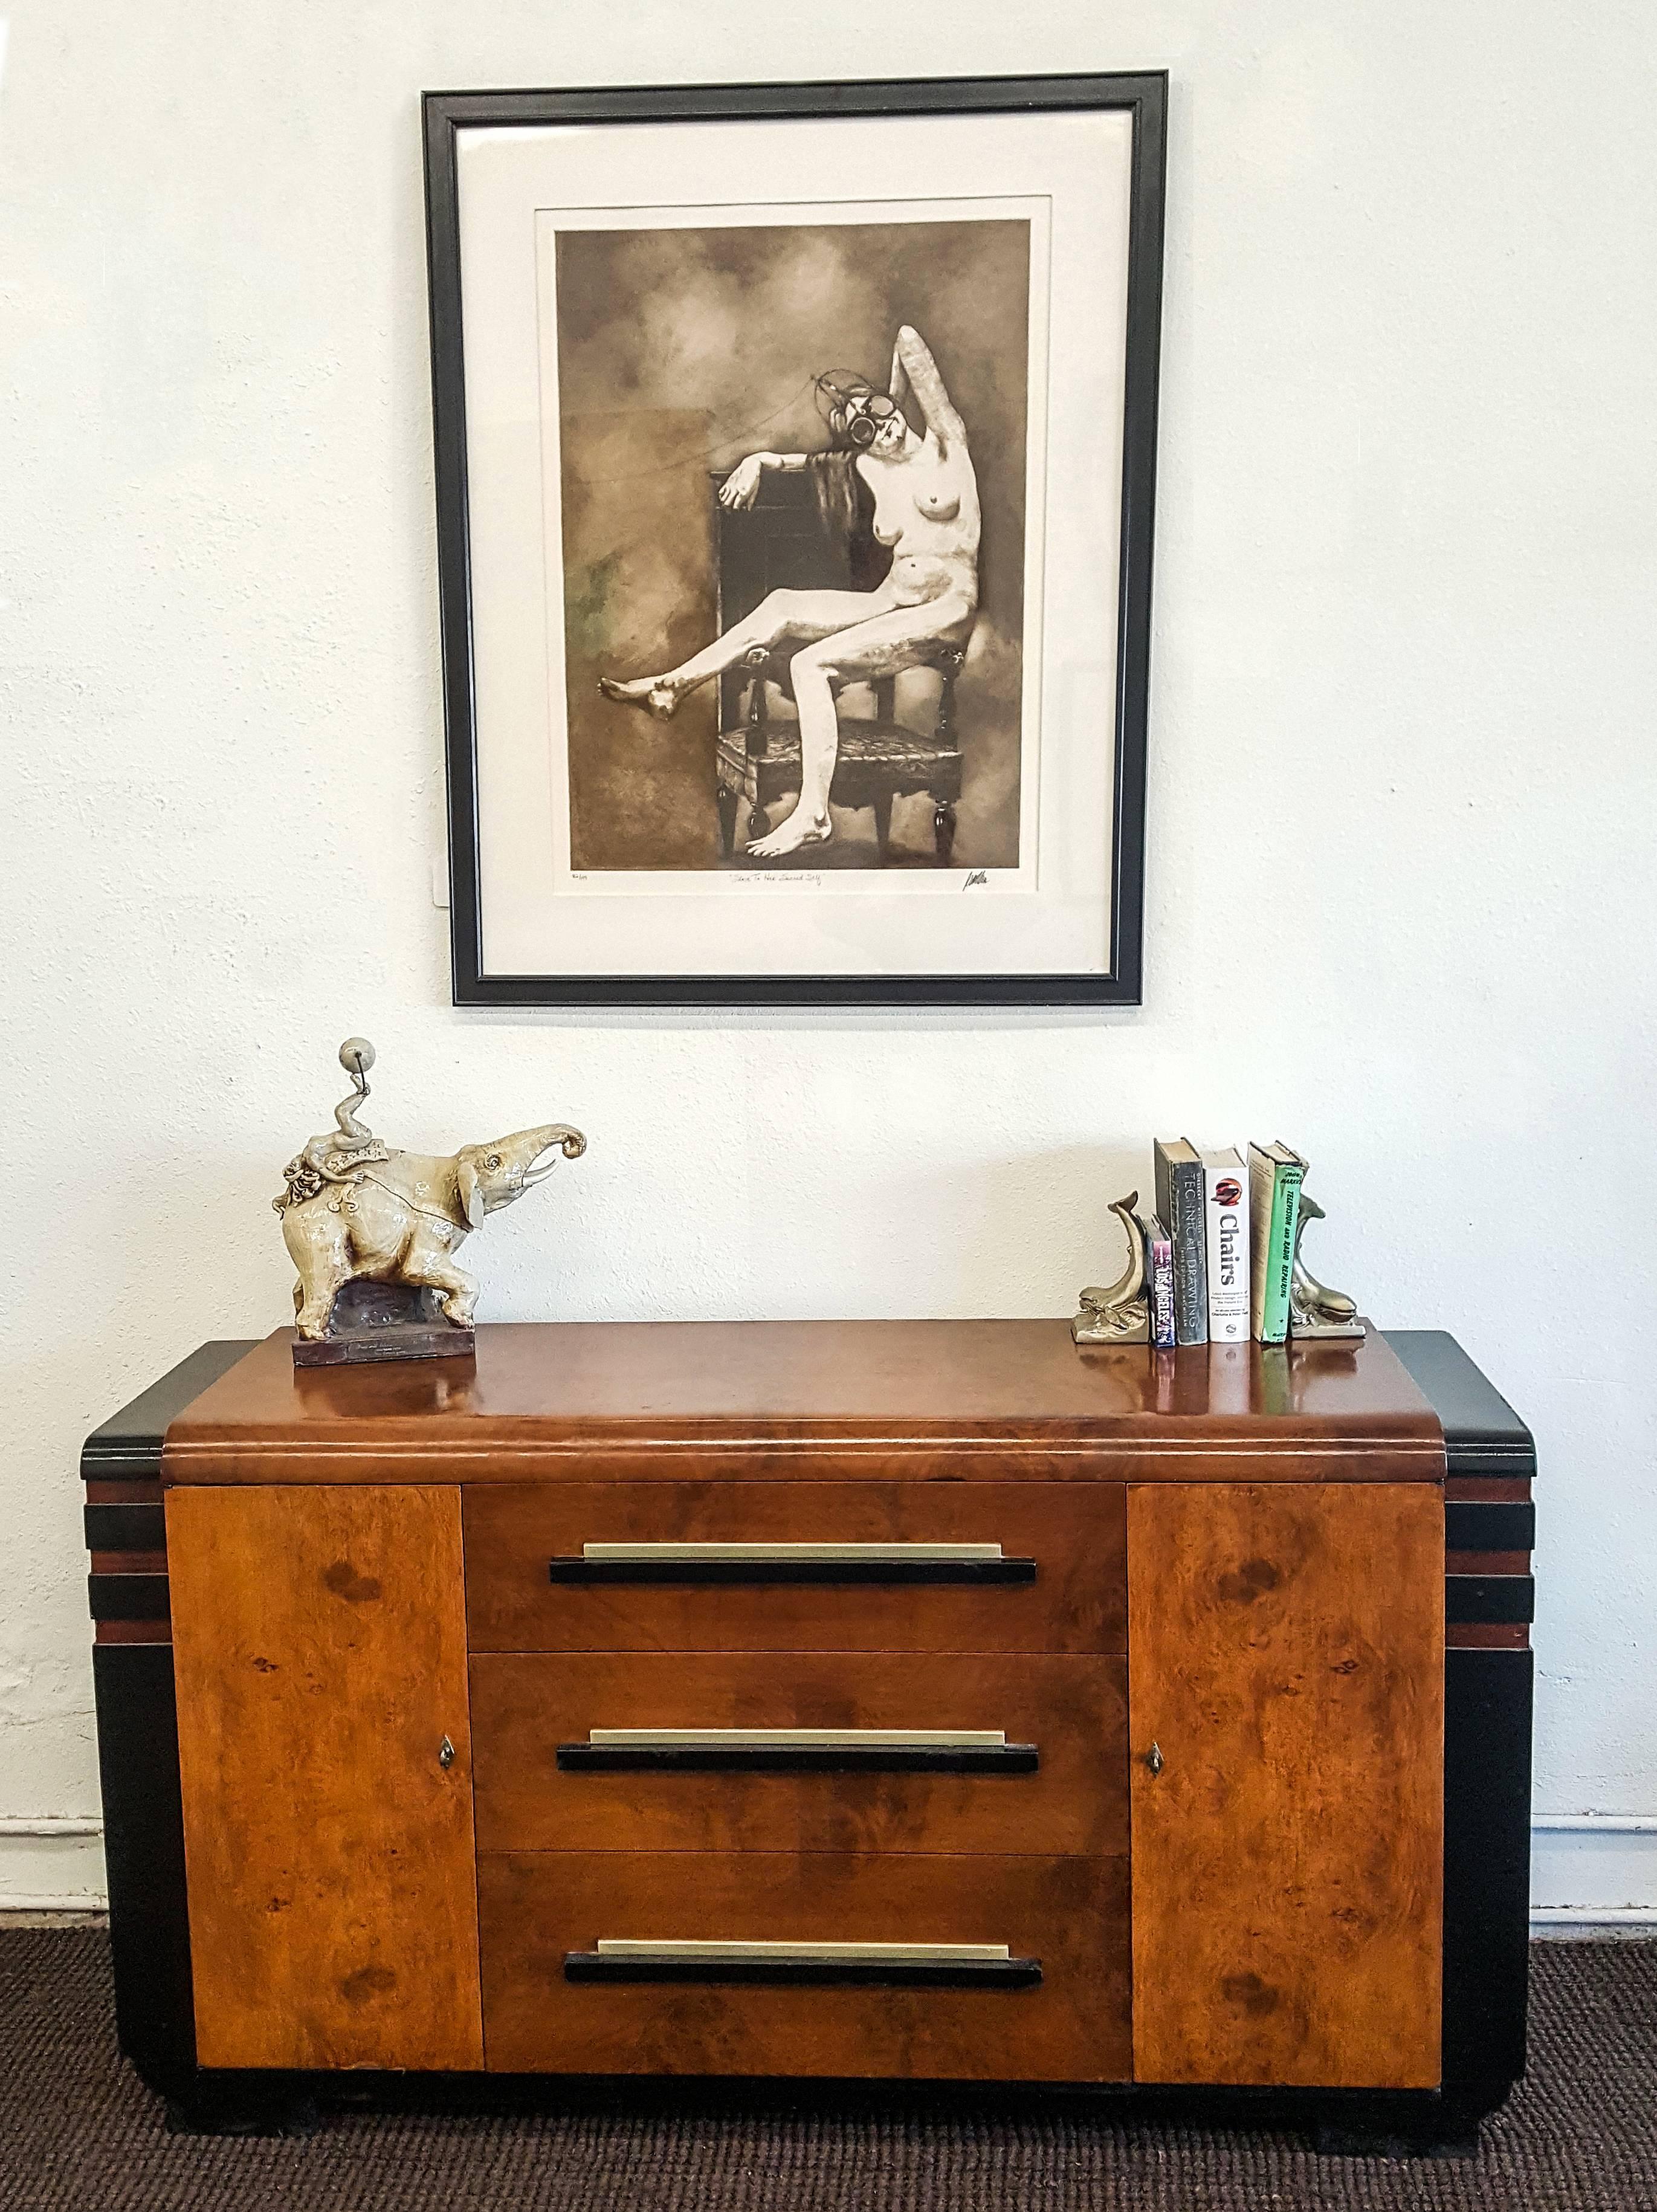 This piece is stunning. An original Donald Deskey buffet for Hastings Table Company. Donald Deskey (American 1894-1989) was one of America's premier modernist designers, creating the interiors of Radio City Music Hall, as well as packaging for such